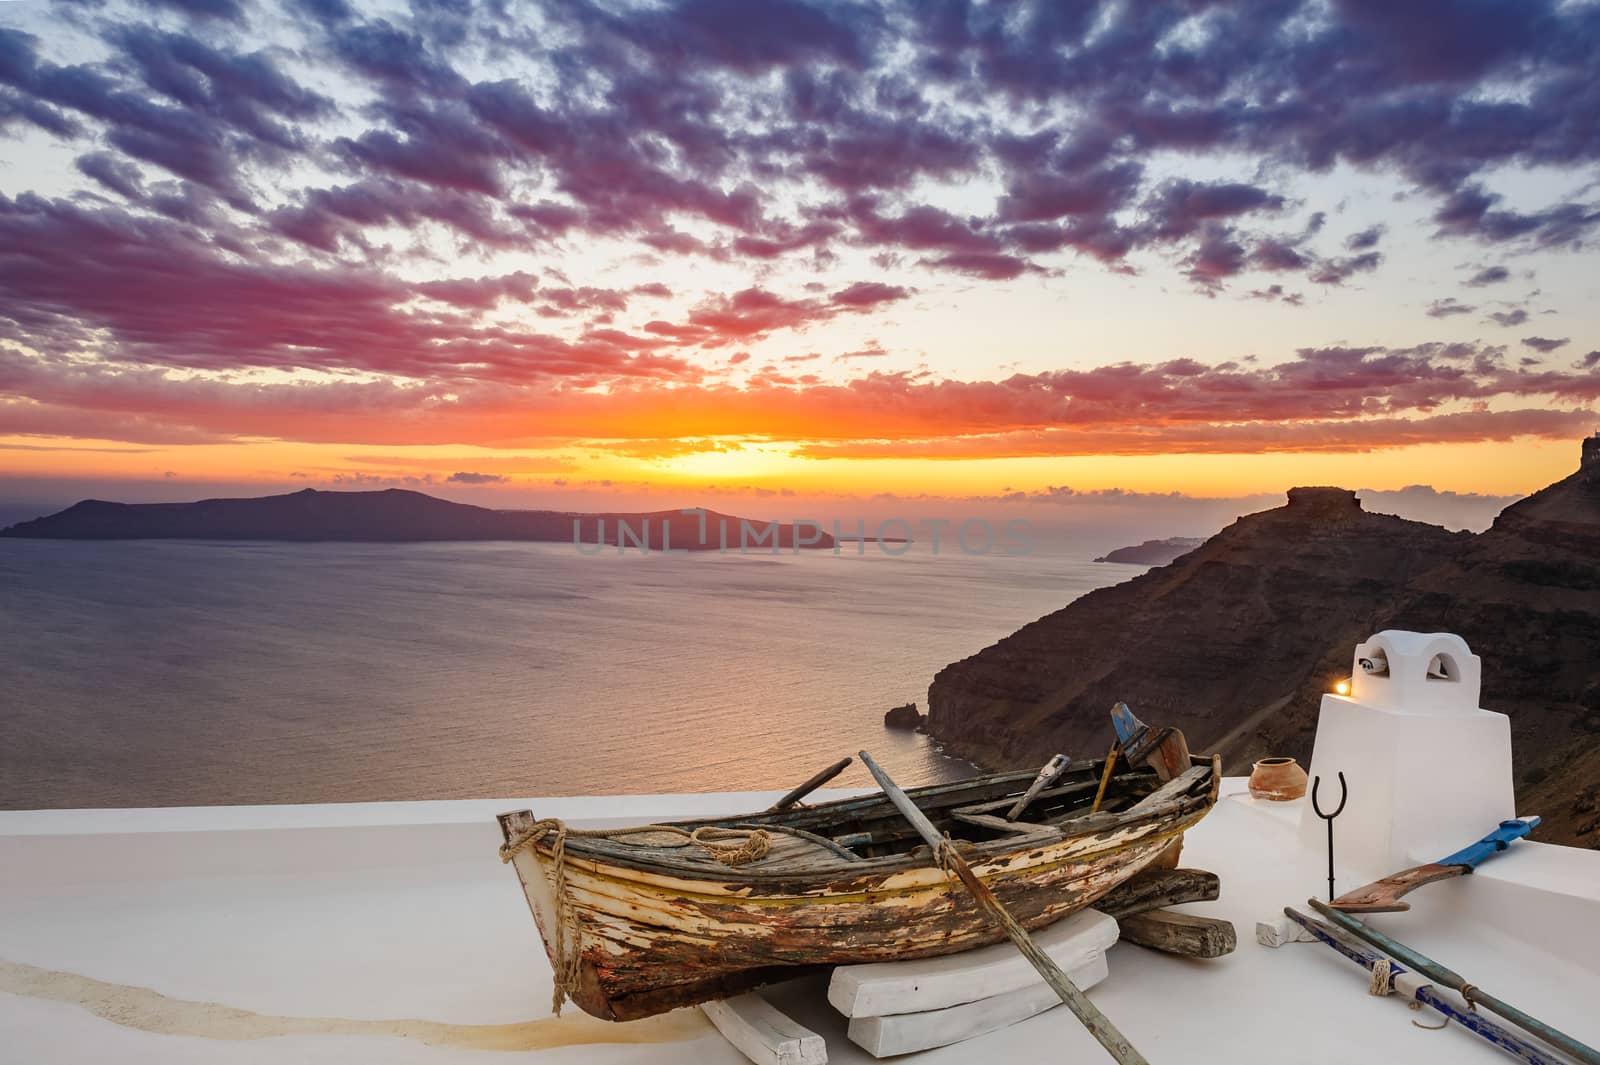 Old wooden fishermans''s boat on roofof house in Firostefani village with typical white architecture, Santorini island, Greece, during sunset over sea.